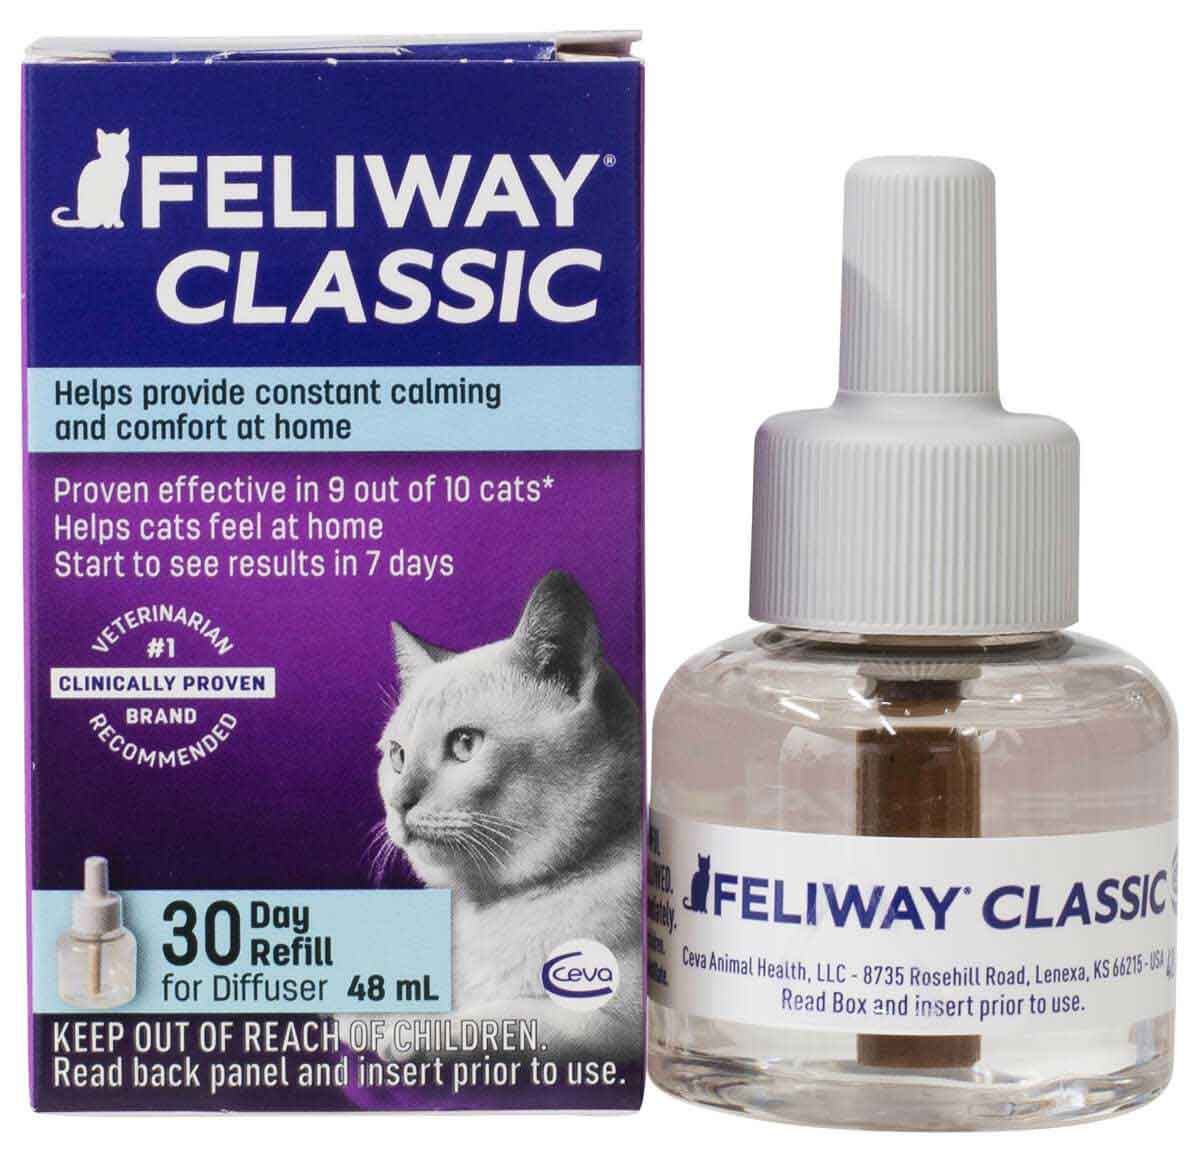 Feliway Classic Diffuser and Refill 48ml